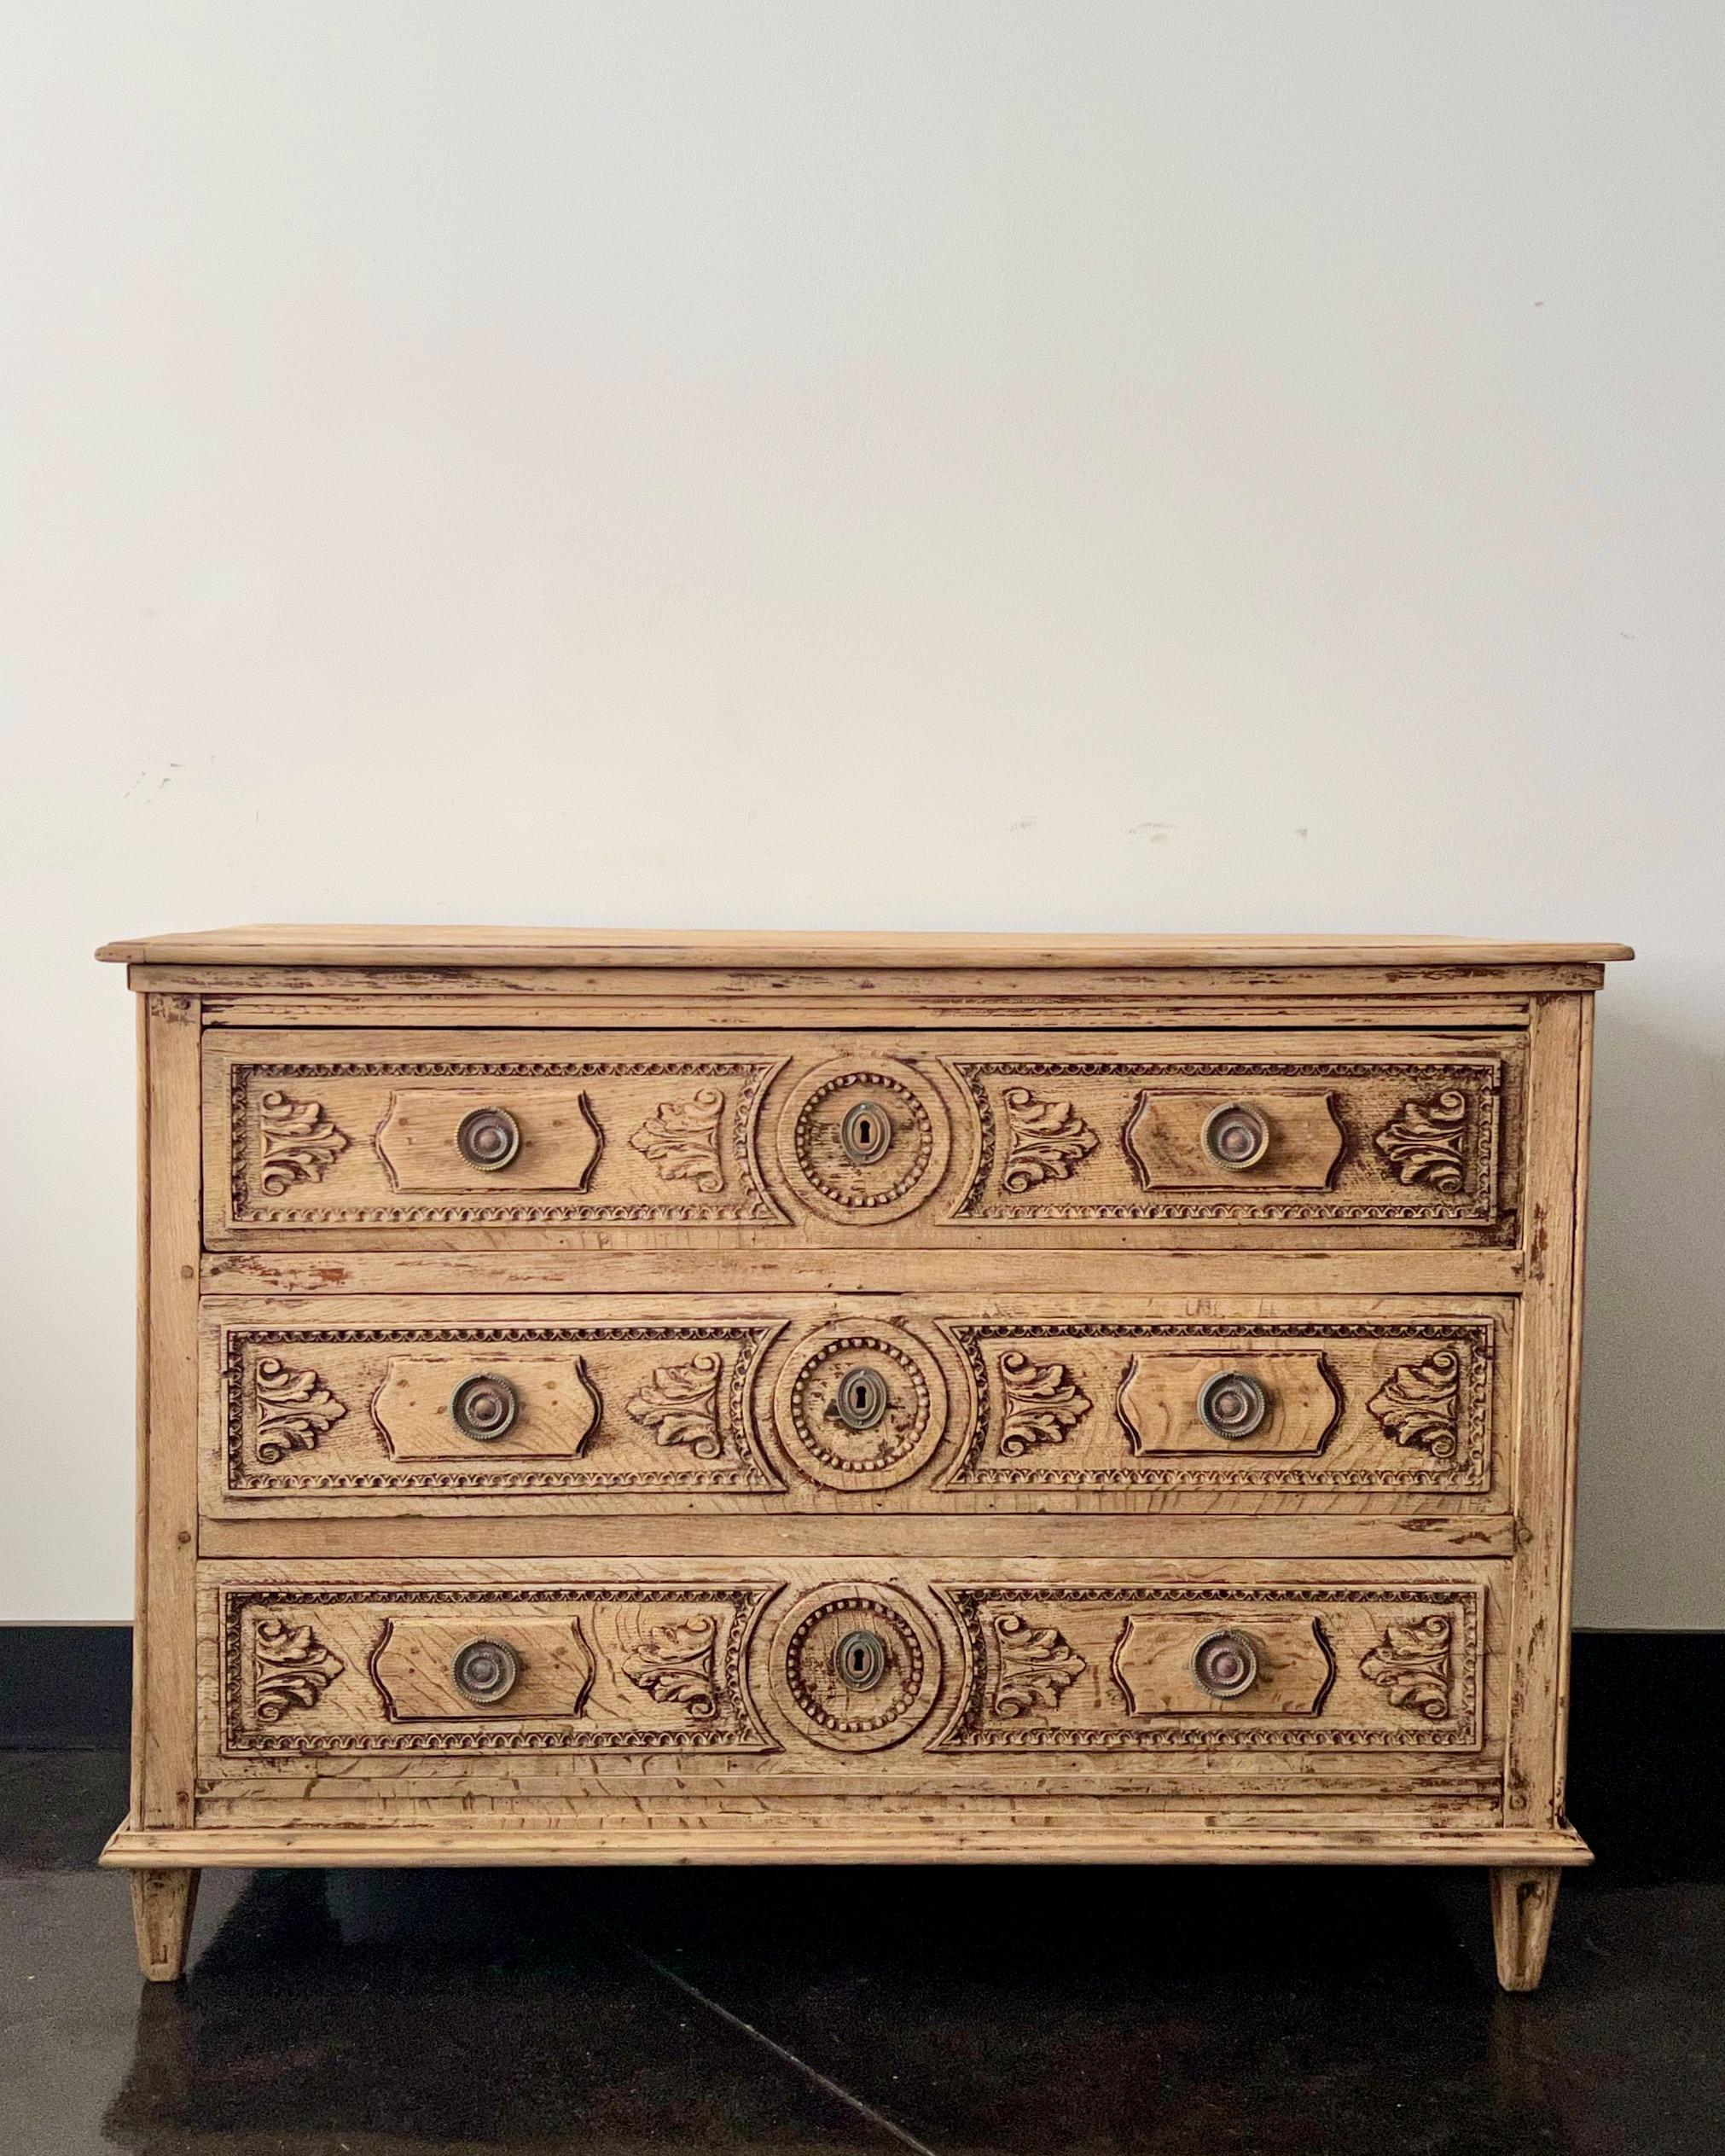 An exquisite 18th century French Louis XVI commode in bleached oak with richly carved drawer fronts and paneled sides and beautiful original hardware,
More than ever, we selected the best, the rarest, the unusual, the spectacular, the most charming